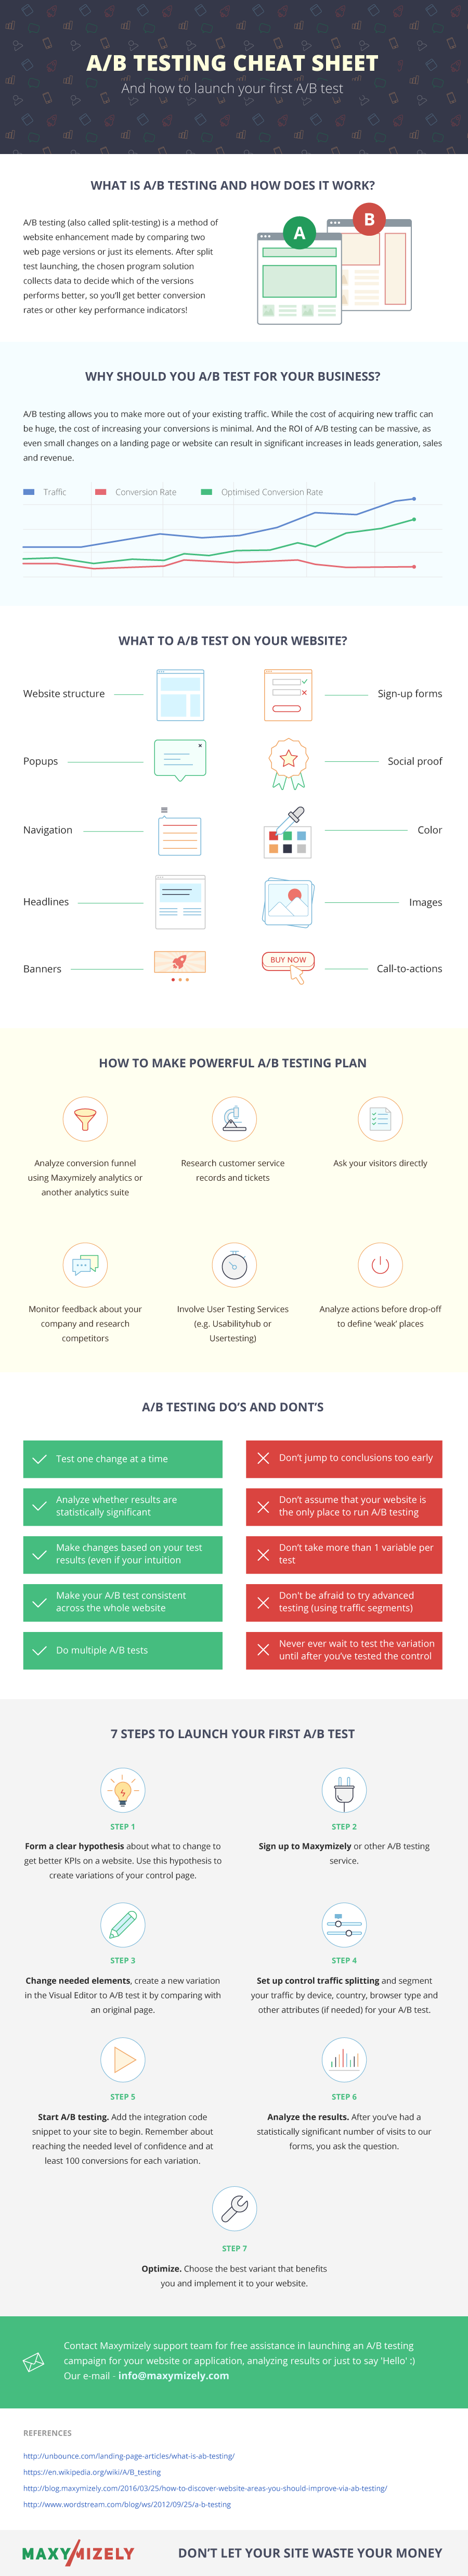 A/B testing cheat sheet or how to launch your first A/B test